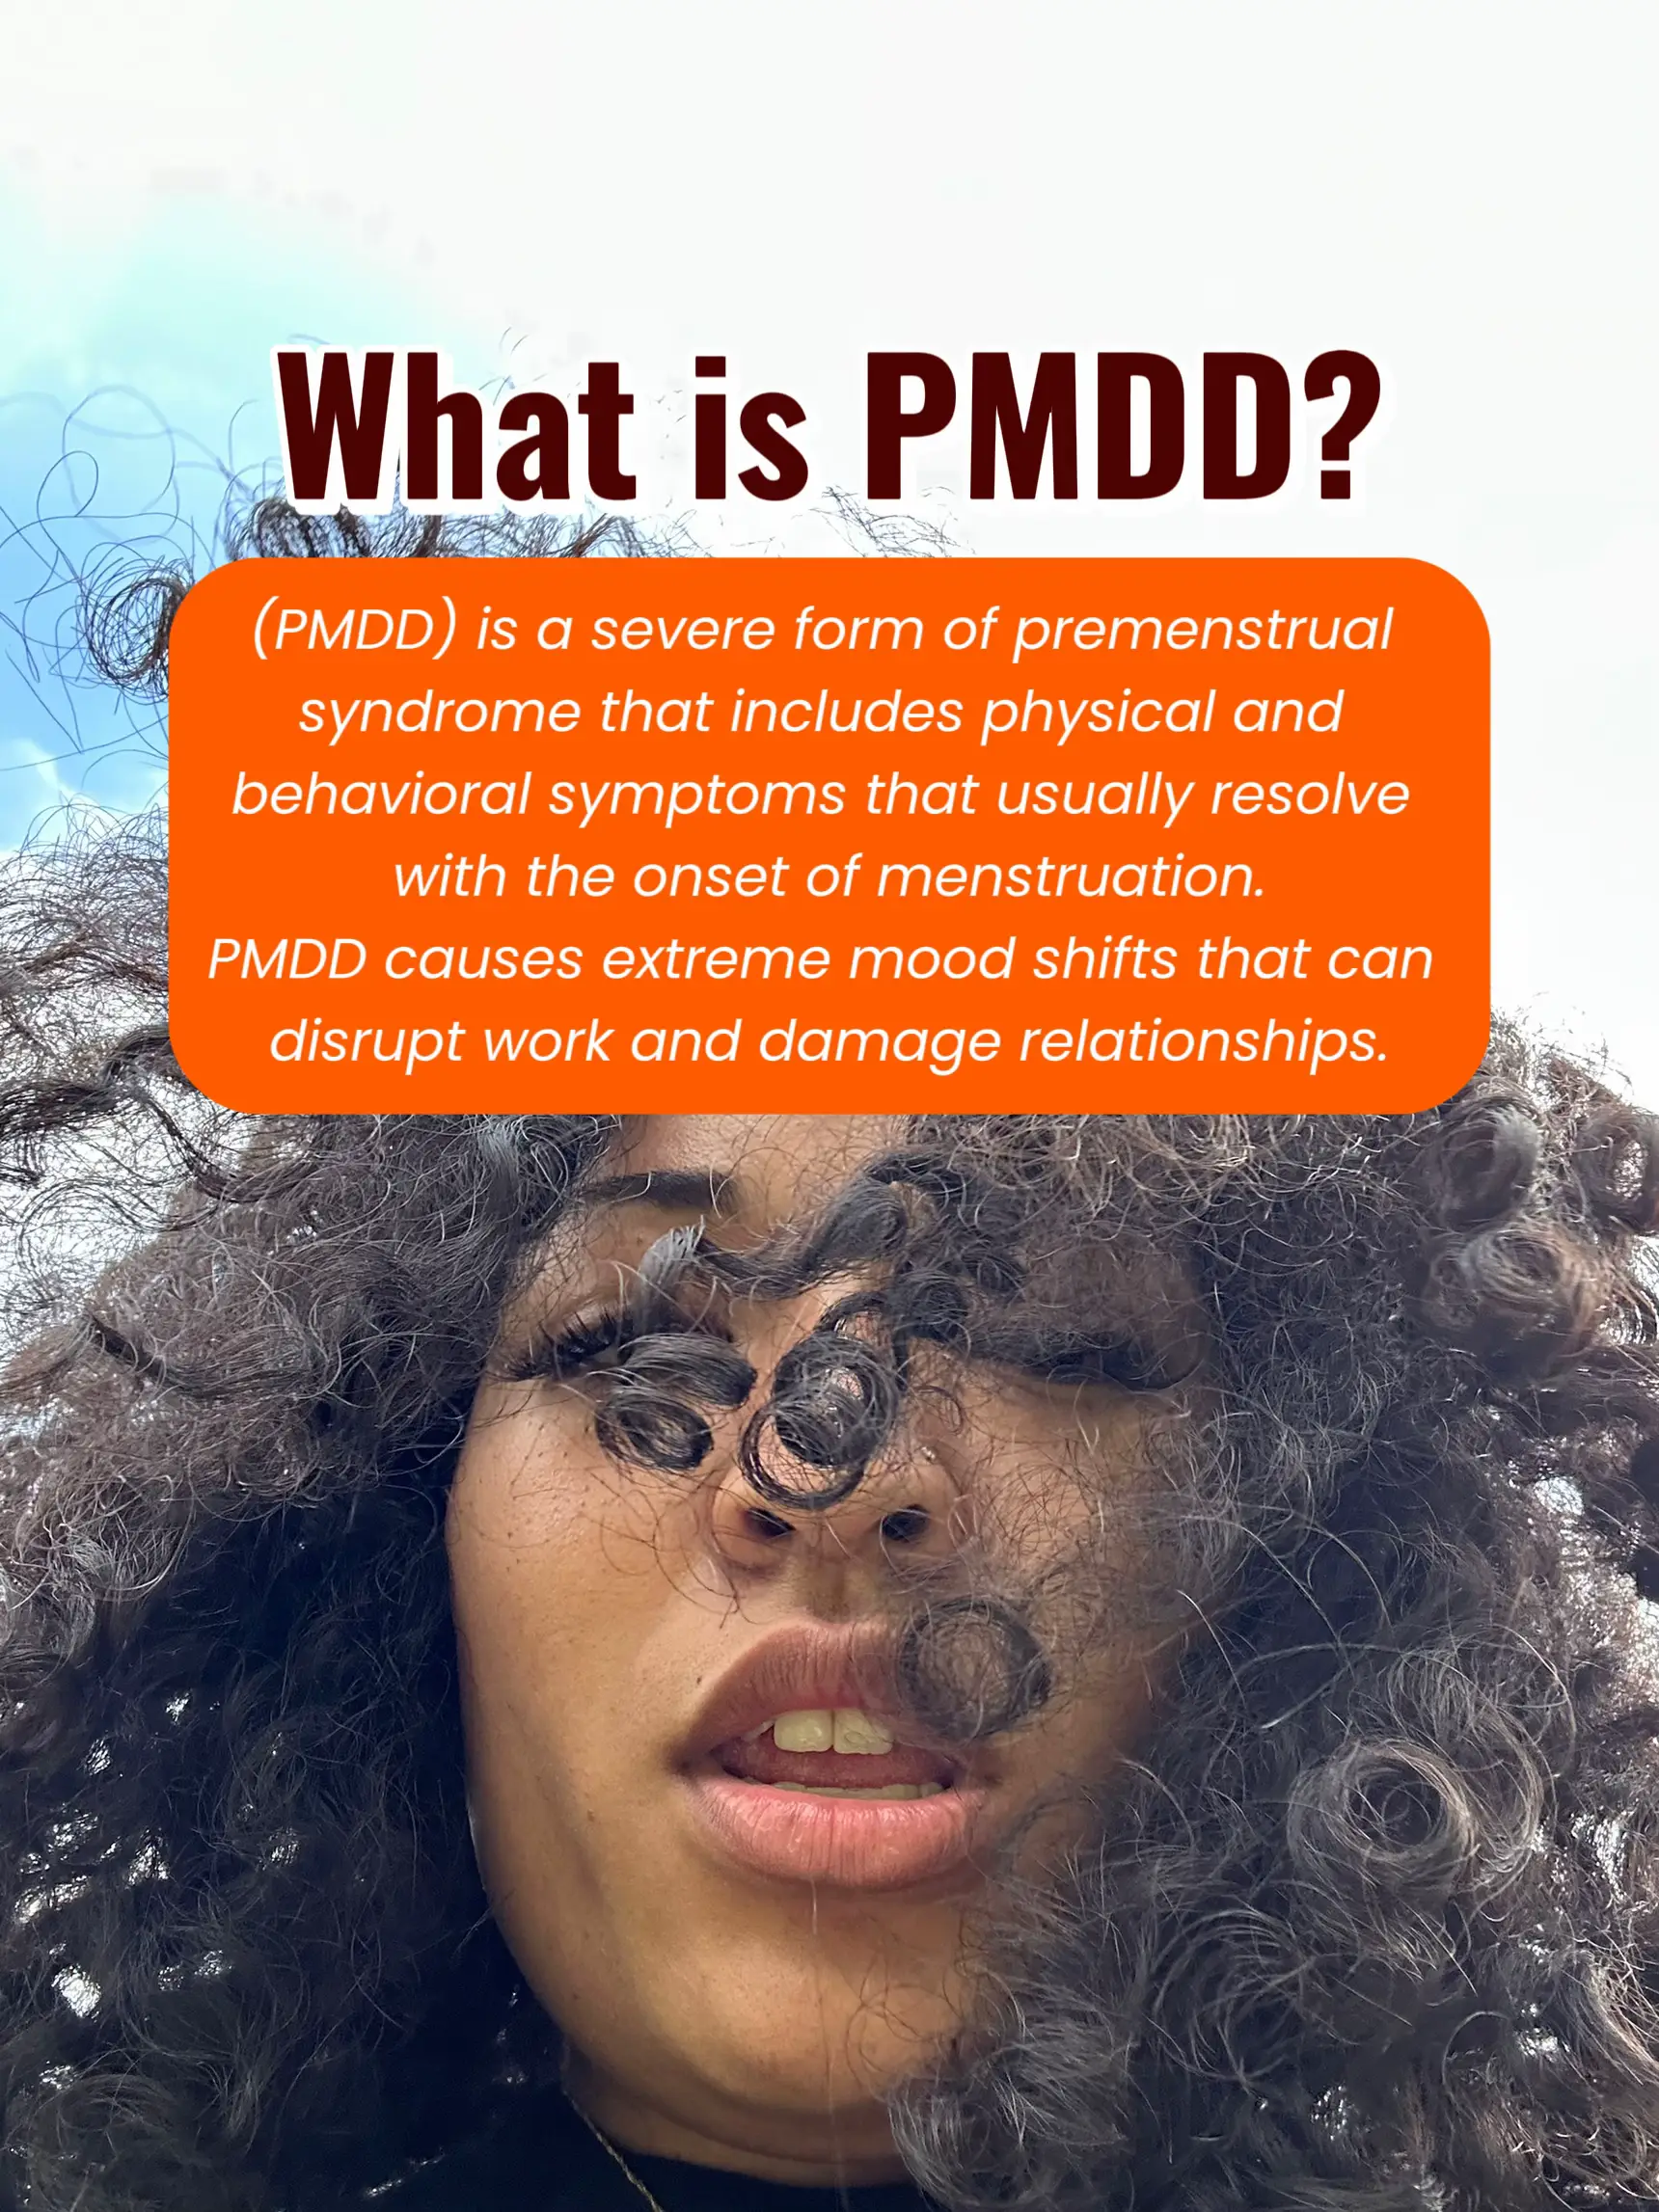 Premenstrual Dysphoric Disorder (PMDD) is a severe form of